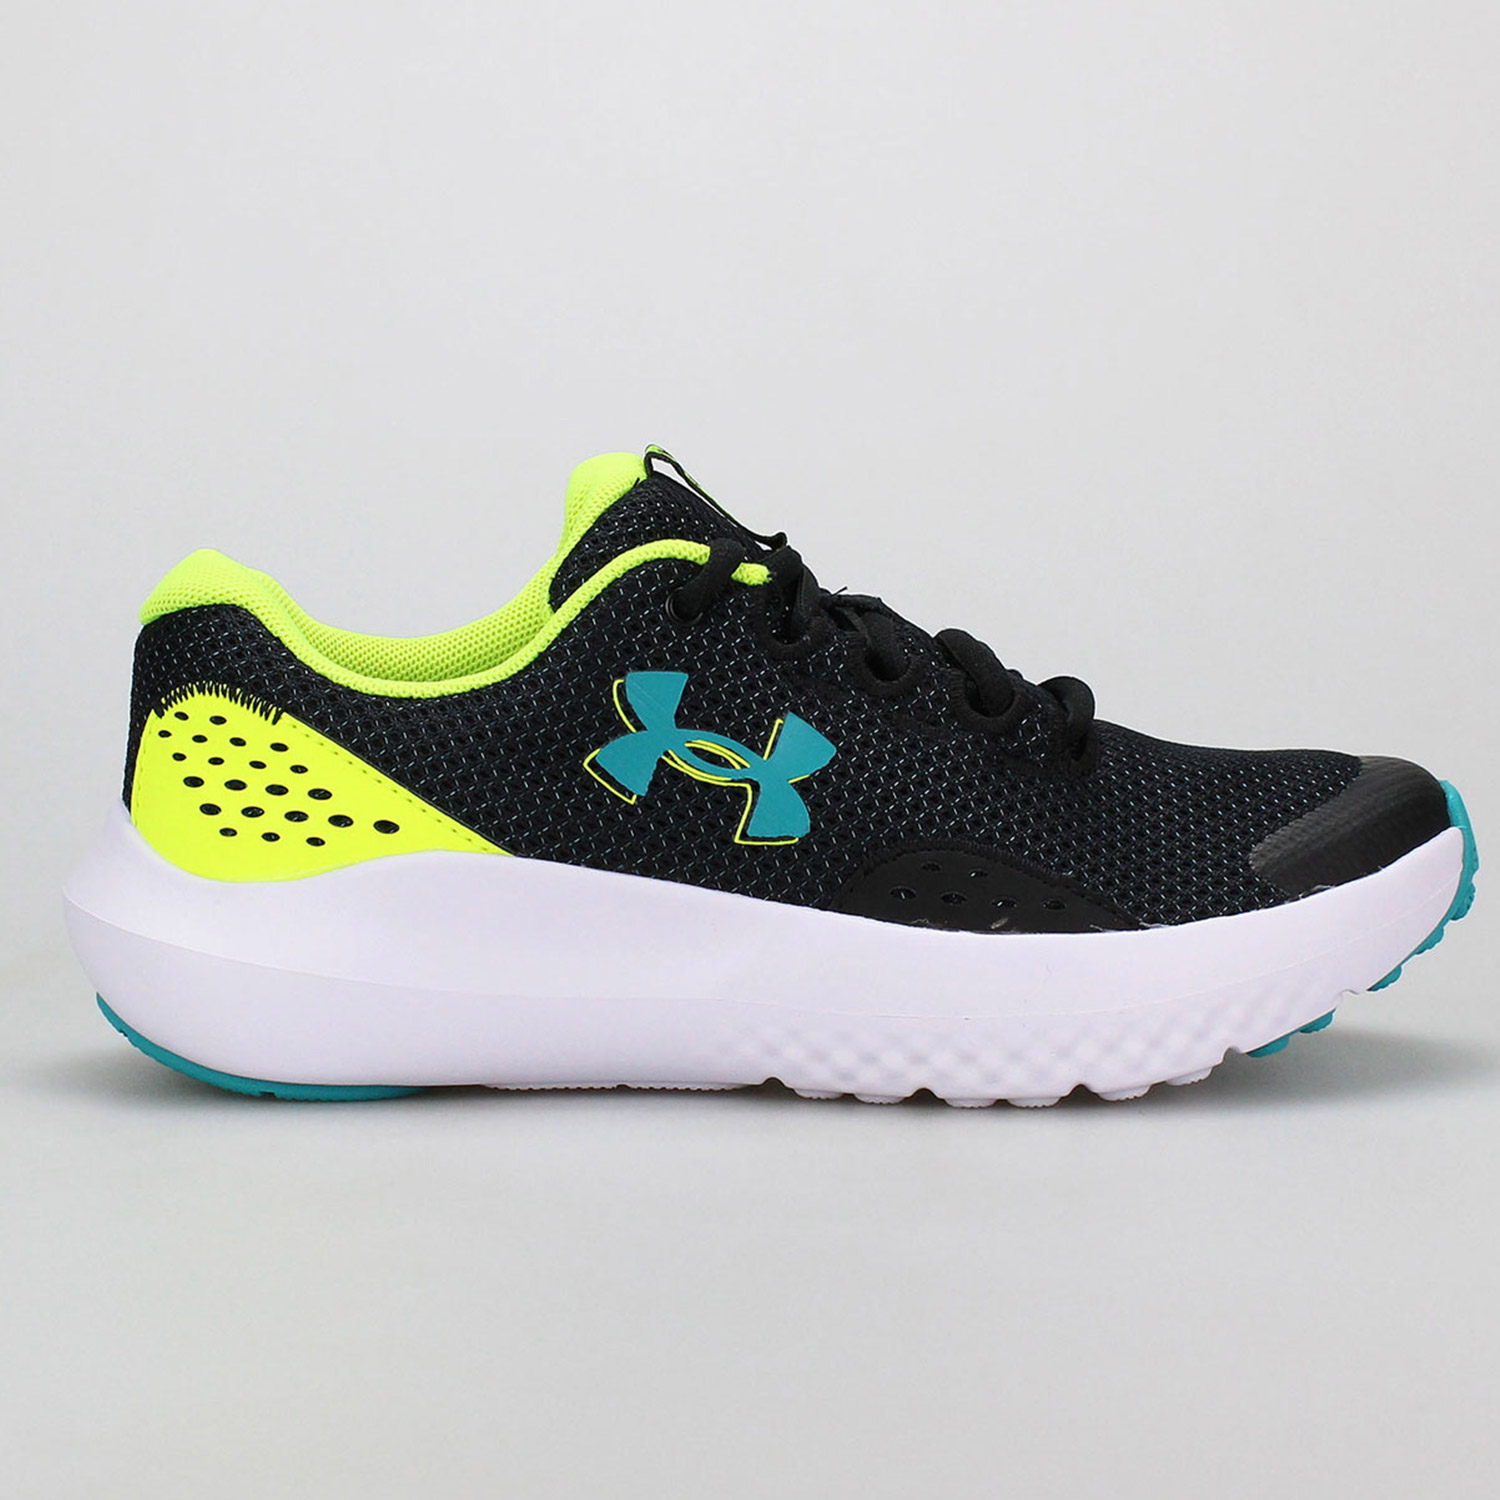 Under Armour - 3027103 UA BGS SURGE 4 - Black/High Vis Yellow/Circuit Teal Παιδικά > Παπούτσια > Αθλητικά > Παπούτσι Low Cut